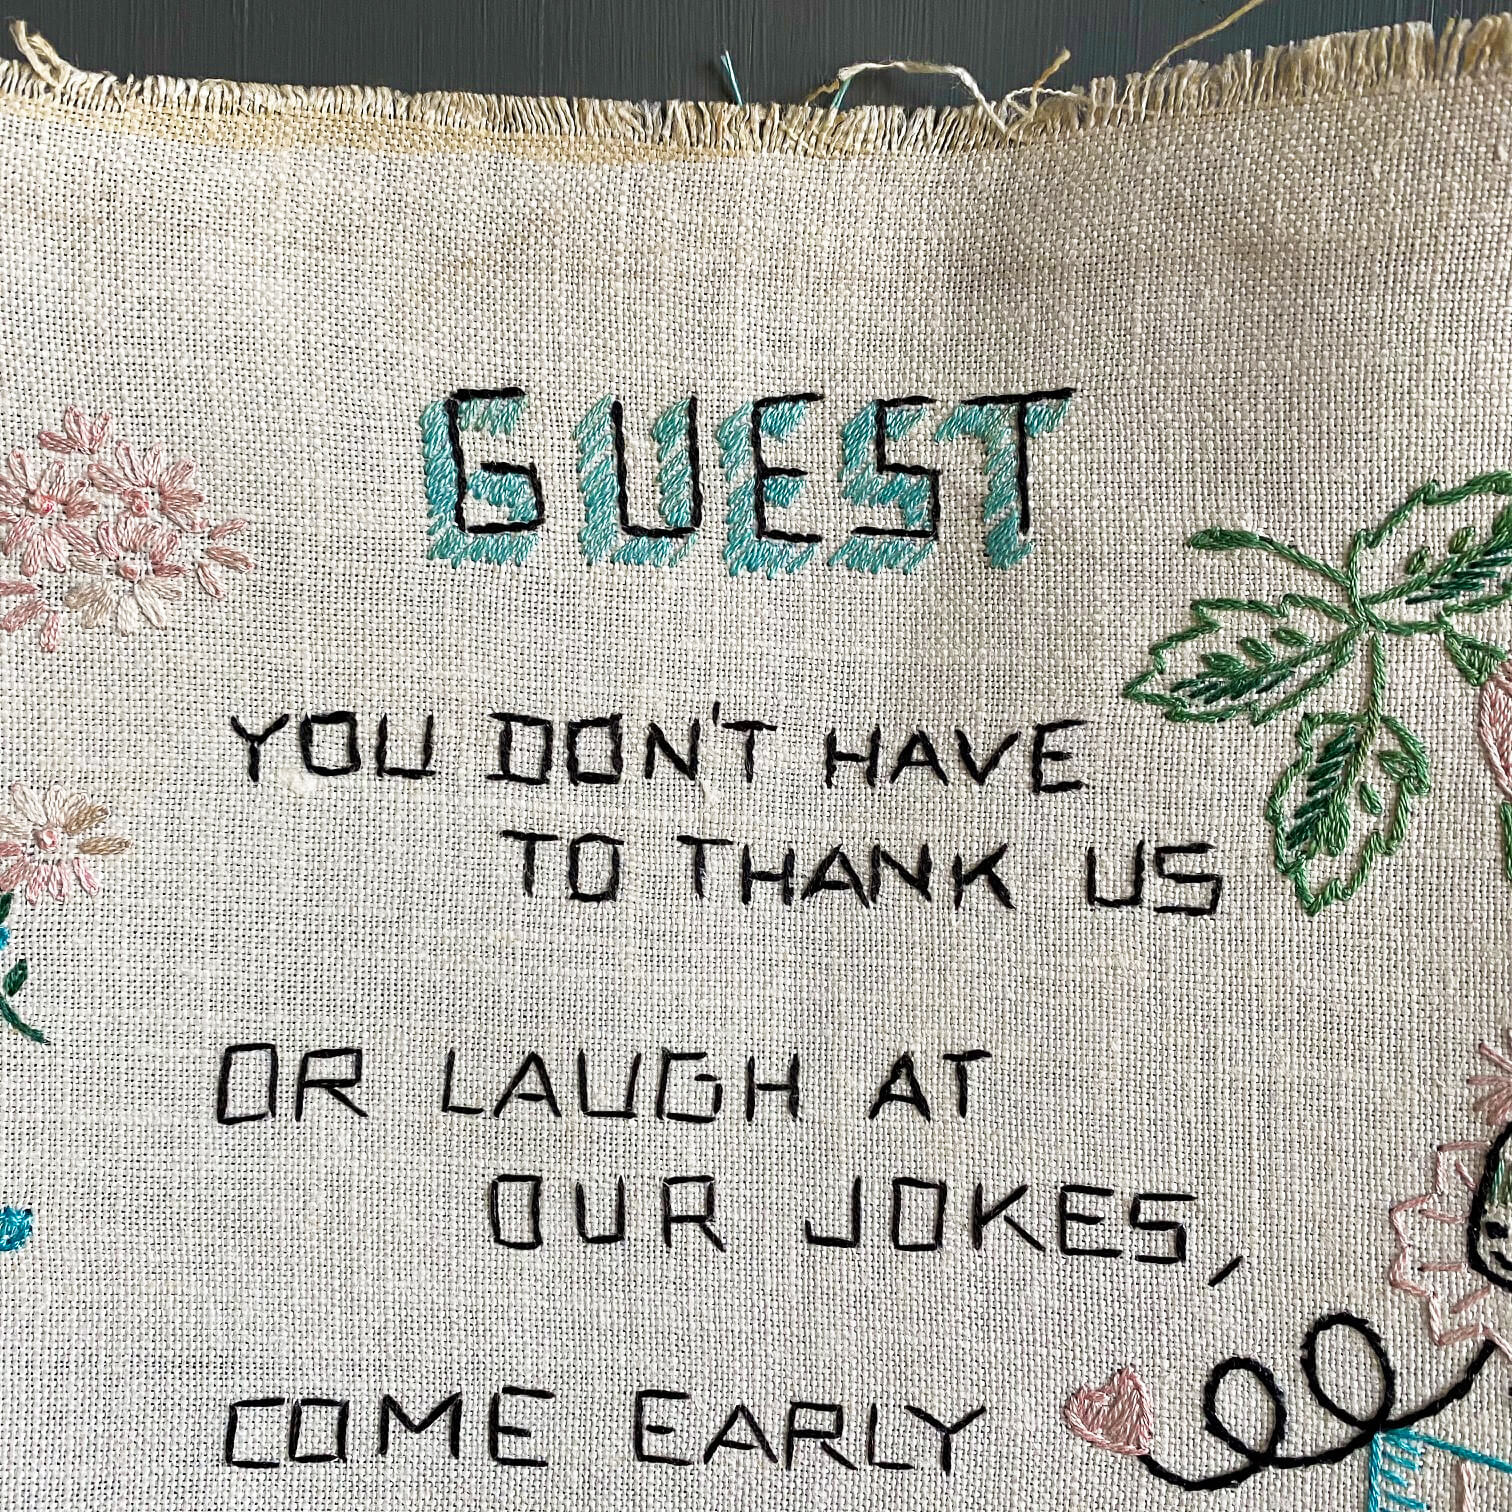 Rare Vintage Embroidery Guest Sign - Handstitched Embroidered Poem - Standing Invitation